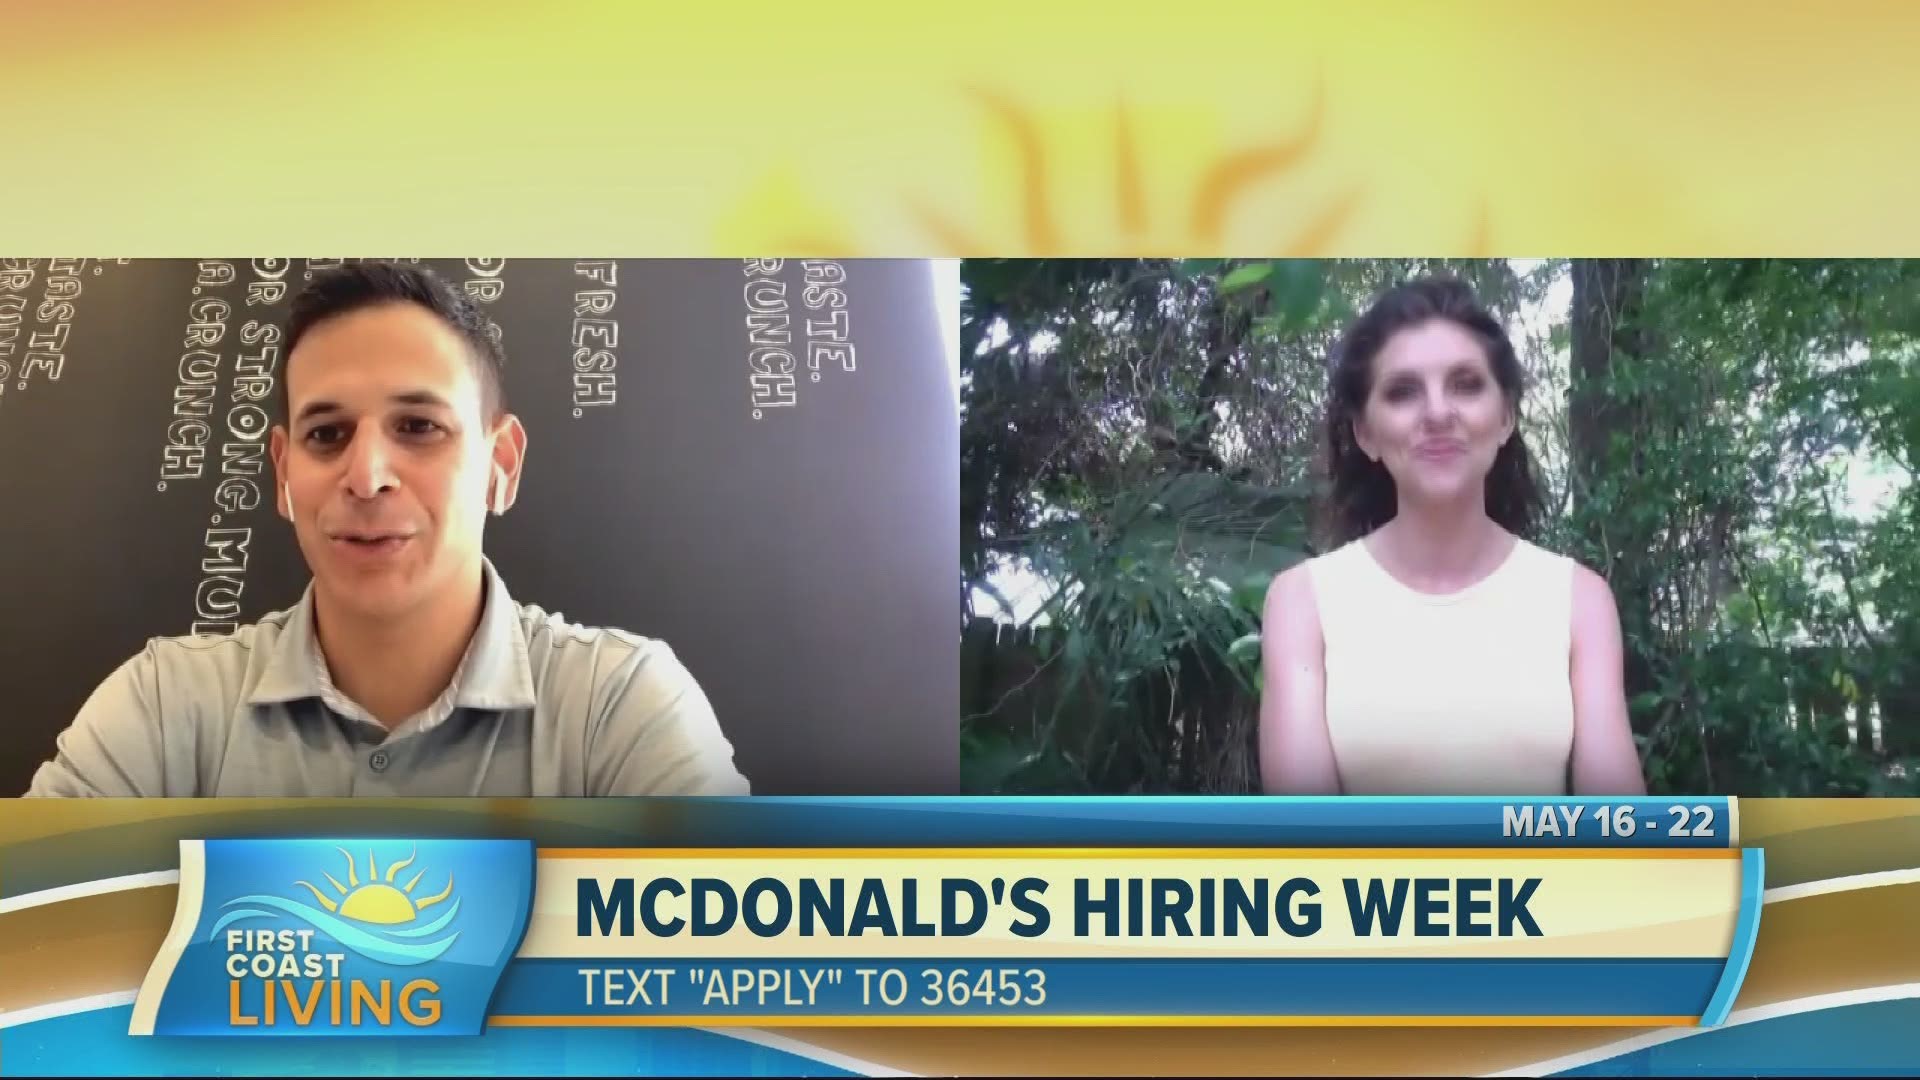 Looking for a job where you can grow with the company? McDonald's may be the career for you!